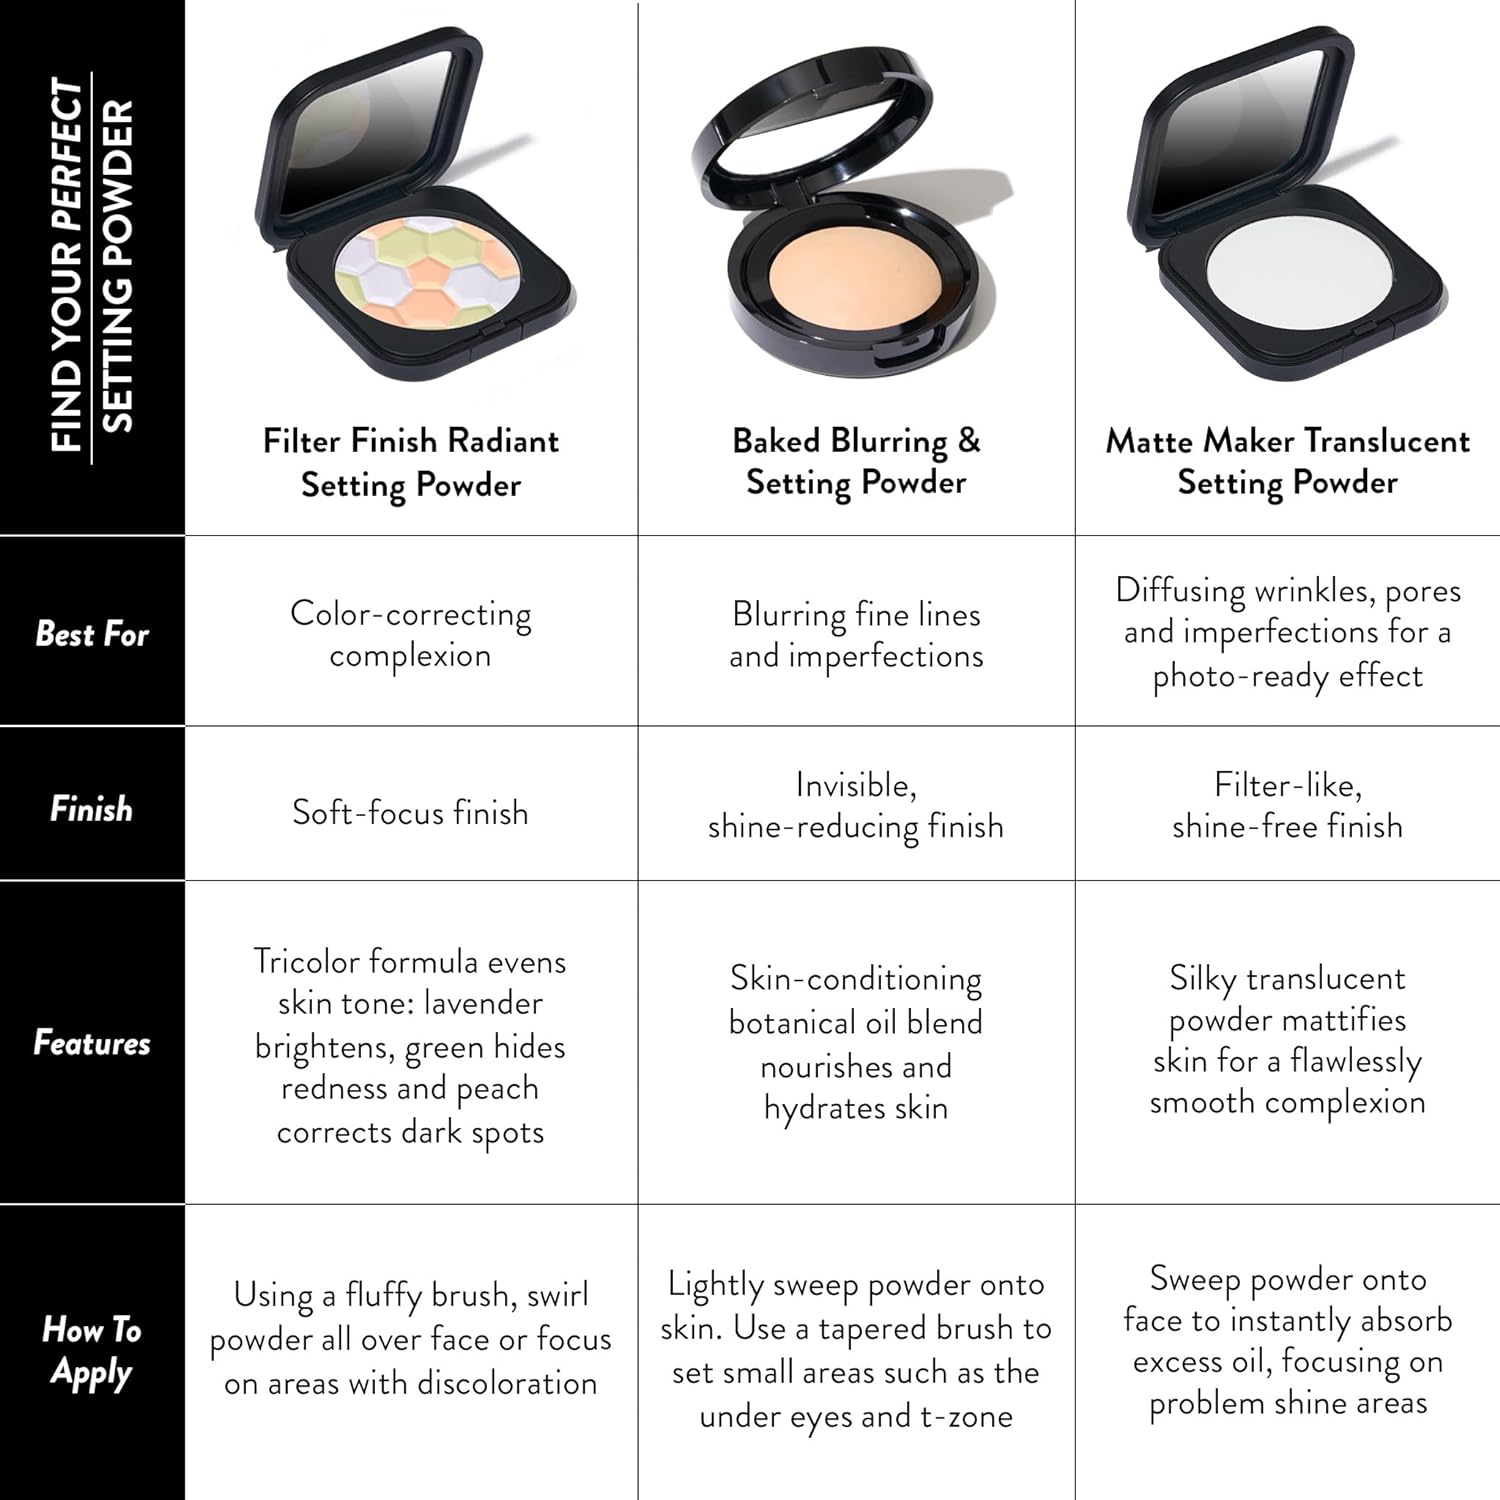 Baked Blurring + Setting Powder, Translucent Makeup Setting Powder for Soft-Focus Finish, Minimize Fine Lines and Pores, Porcelain/Fair - HealthFulBeautyLife